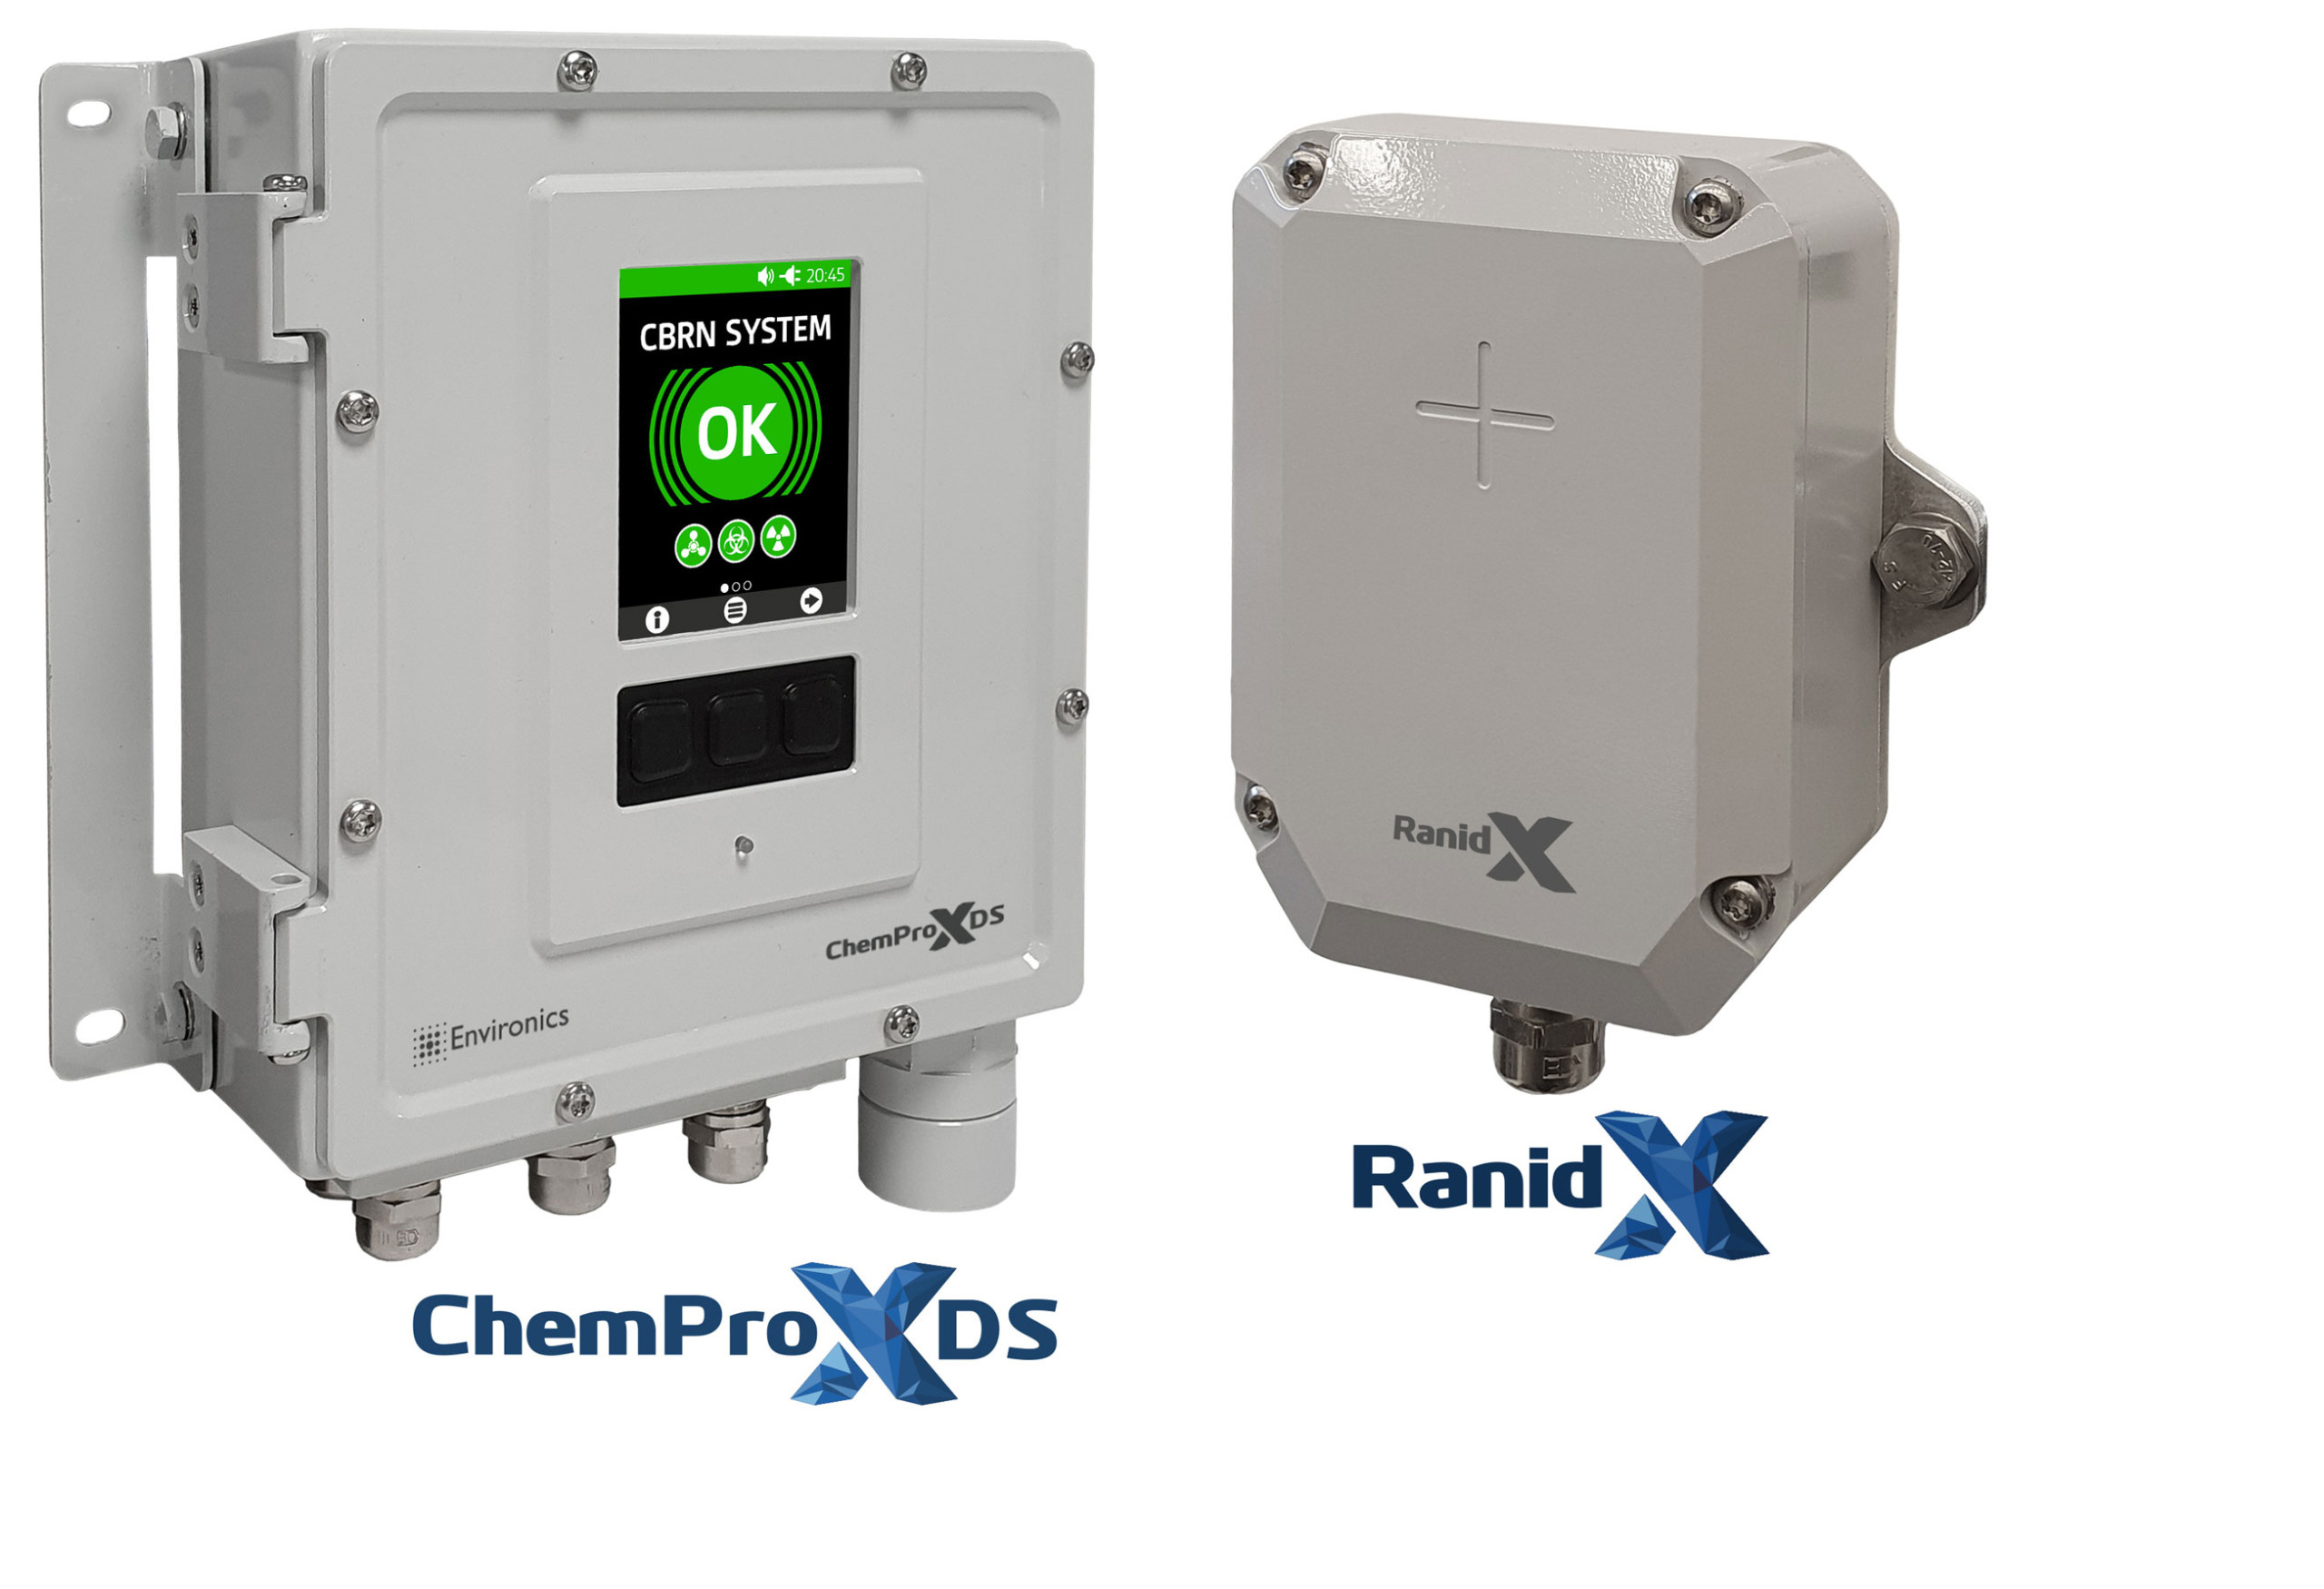 X-System COTS: ChemProX-DS and RanidX